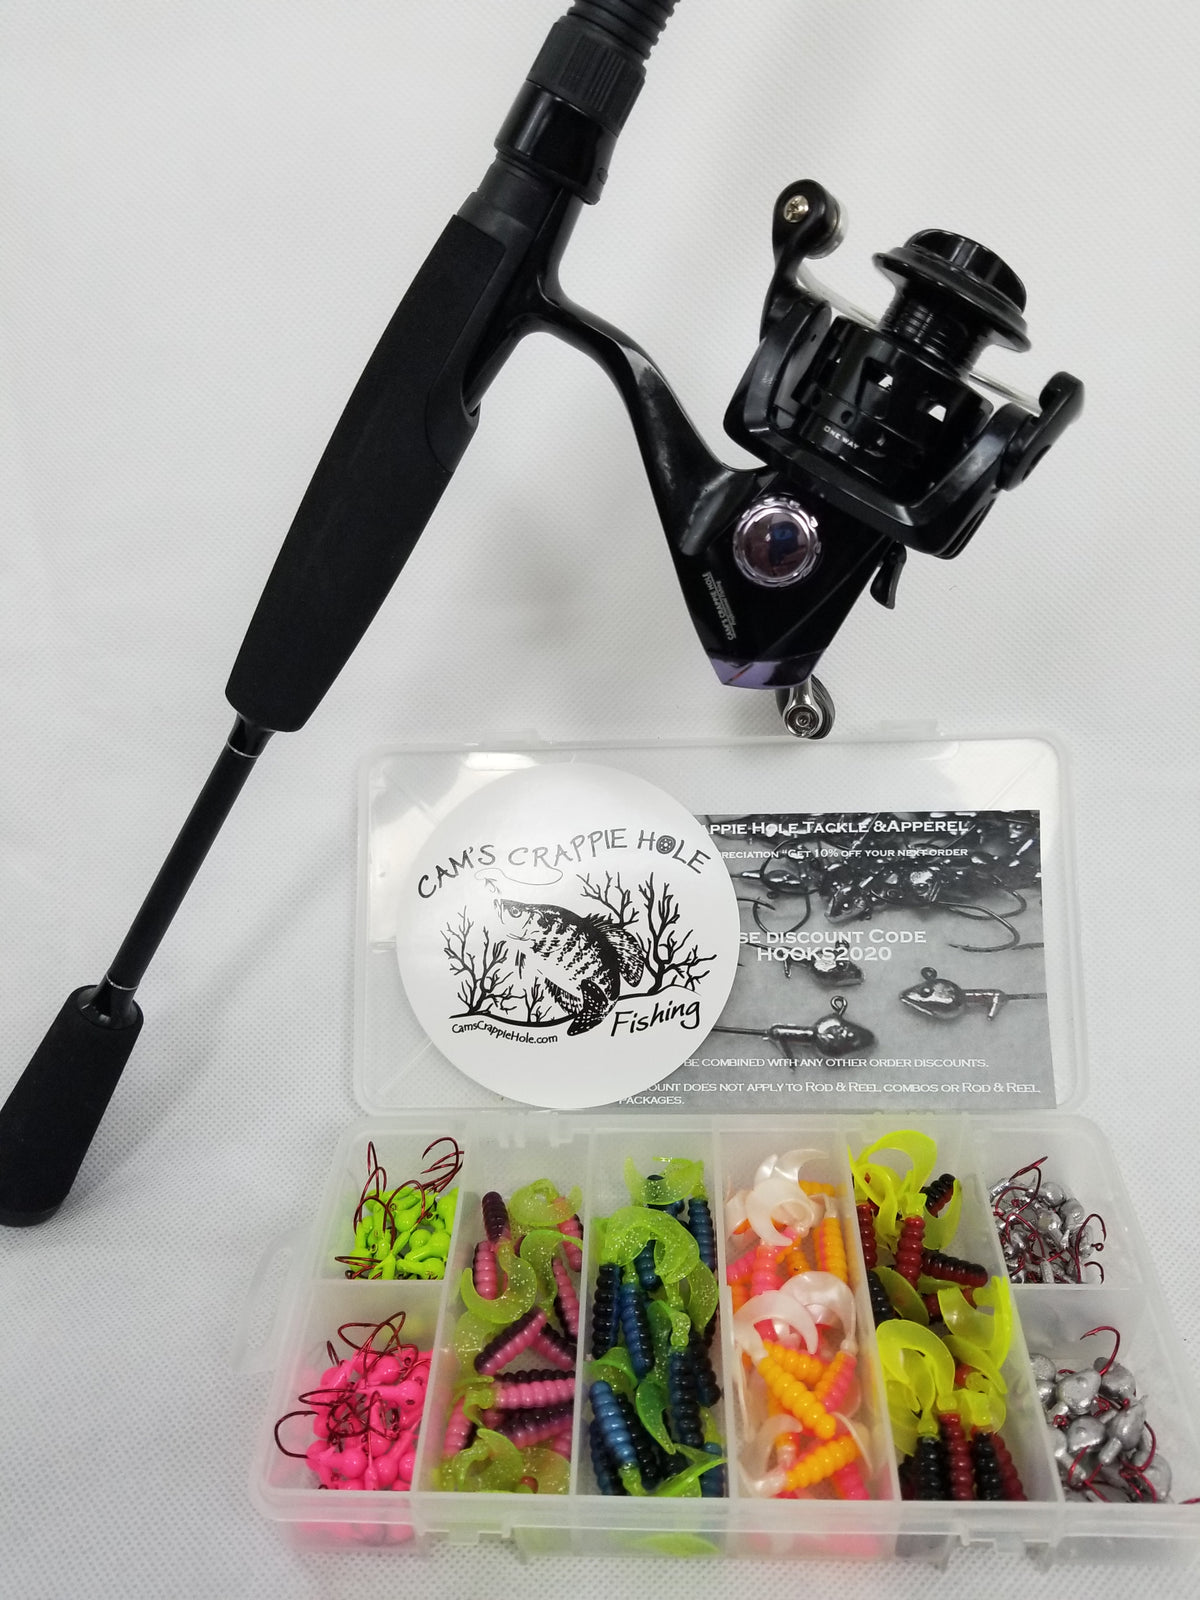 Cam's Black Onyx(10+1) Magic Stik 6'6 Rod and Reel Combo Kit – Cam's  CRAPPIE HOLE TACKLE & APPAREL